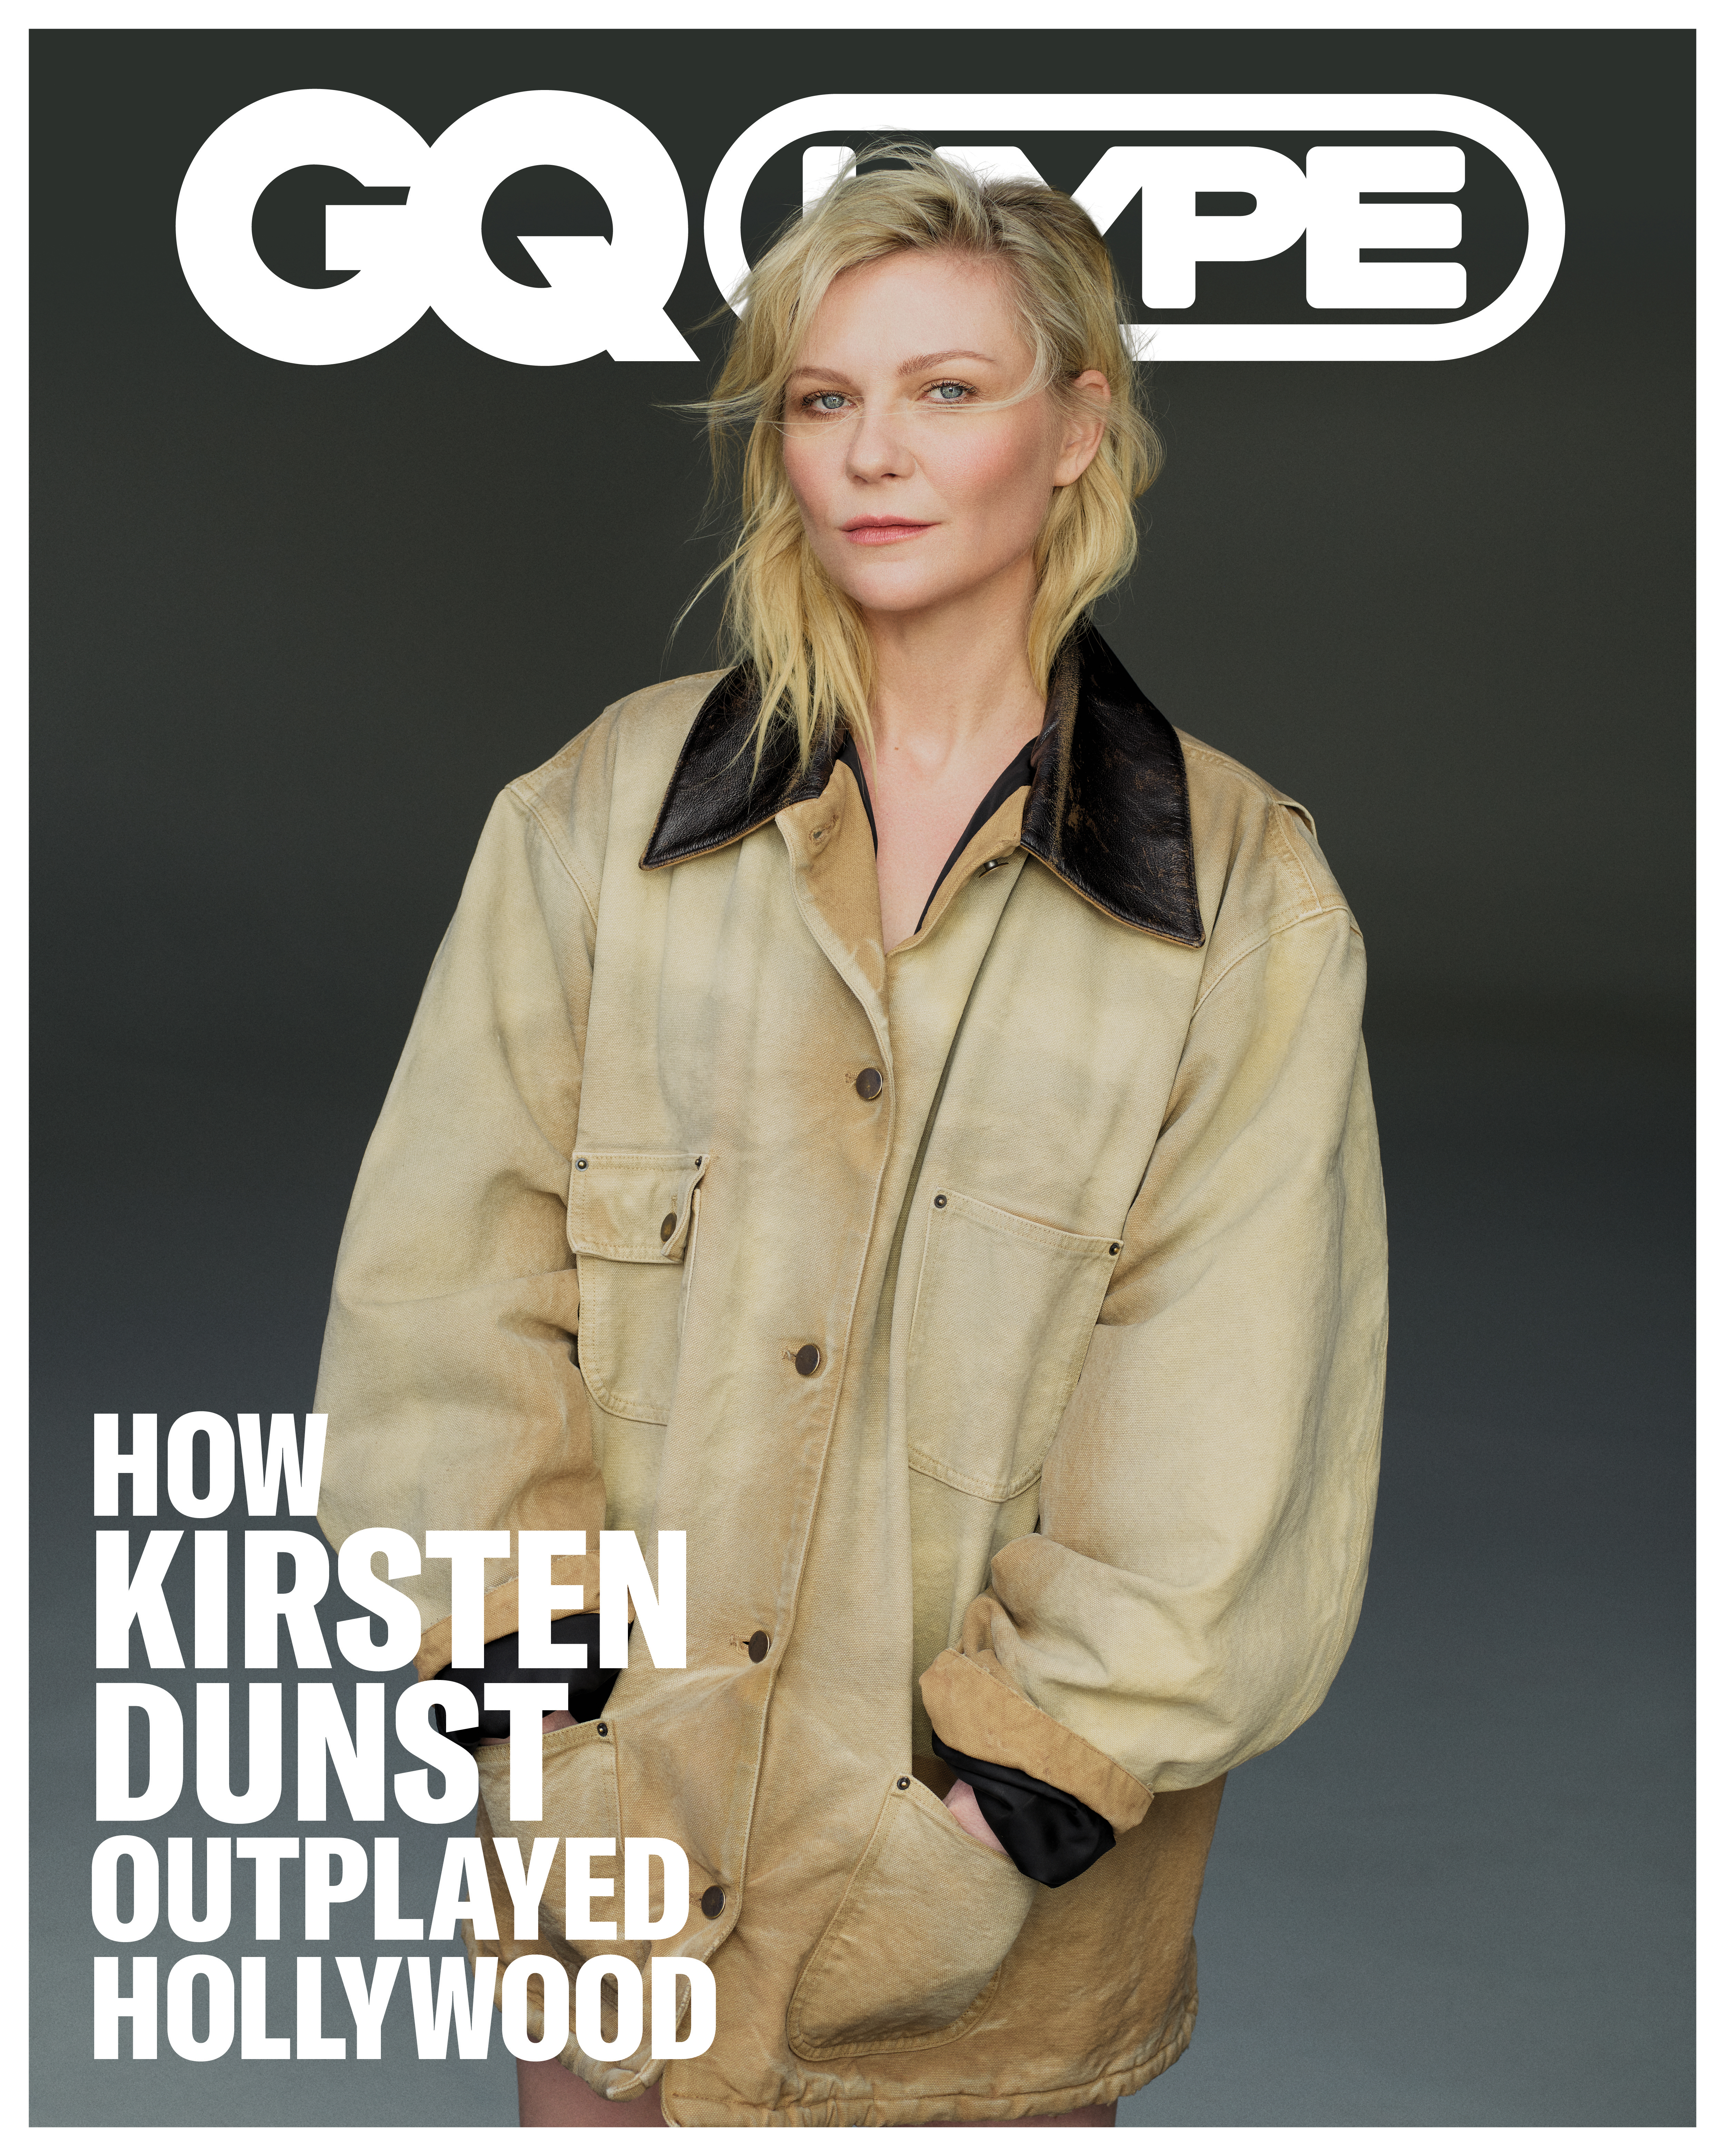 Dunst was interviewed for GQ Hype magazine